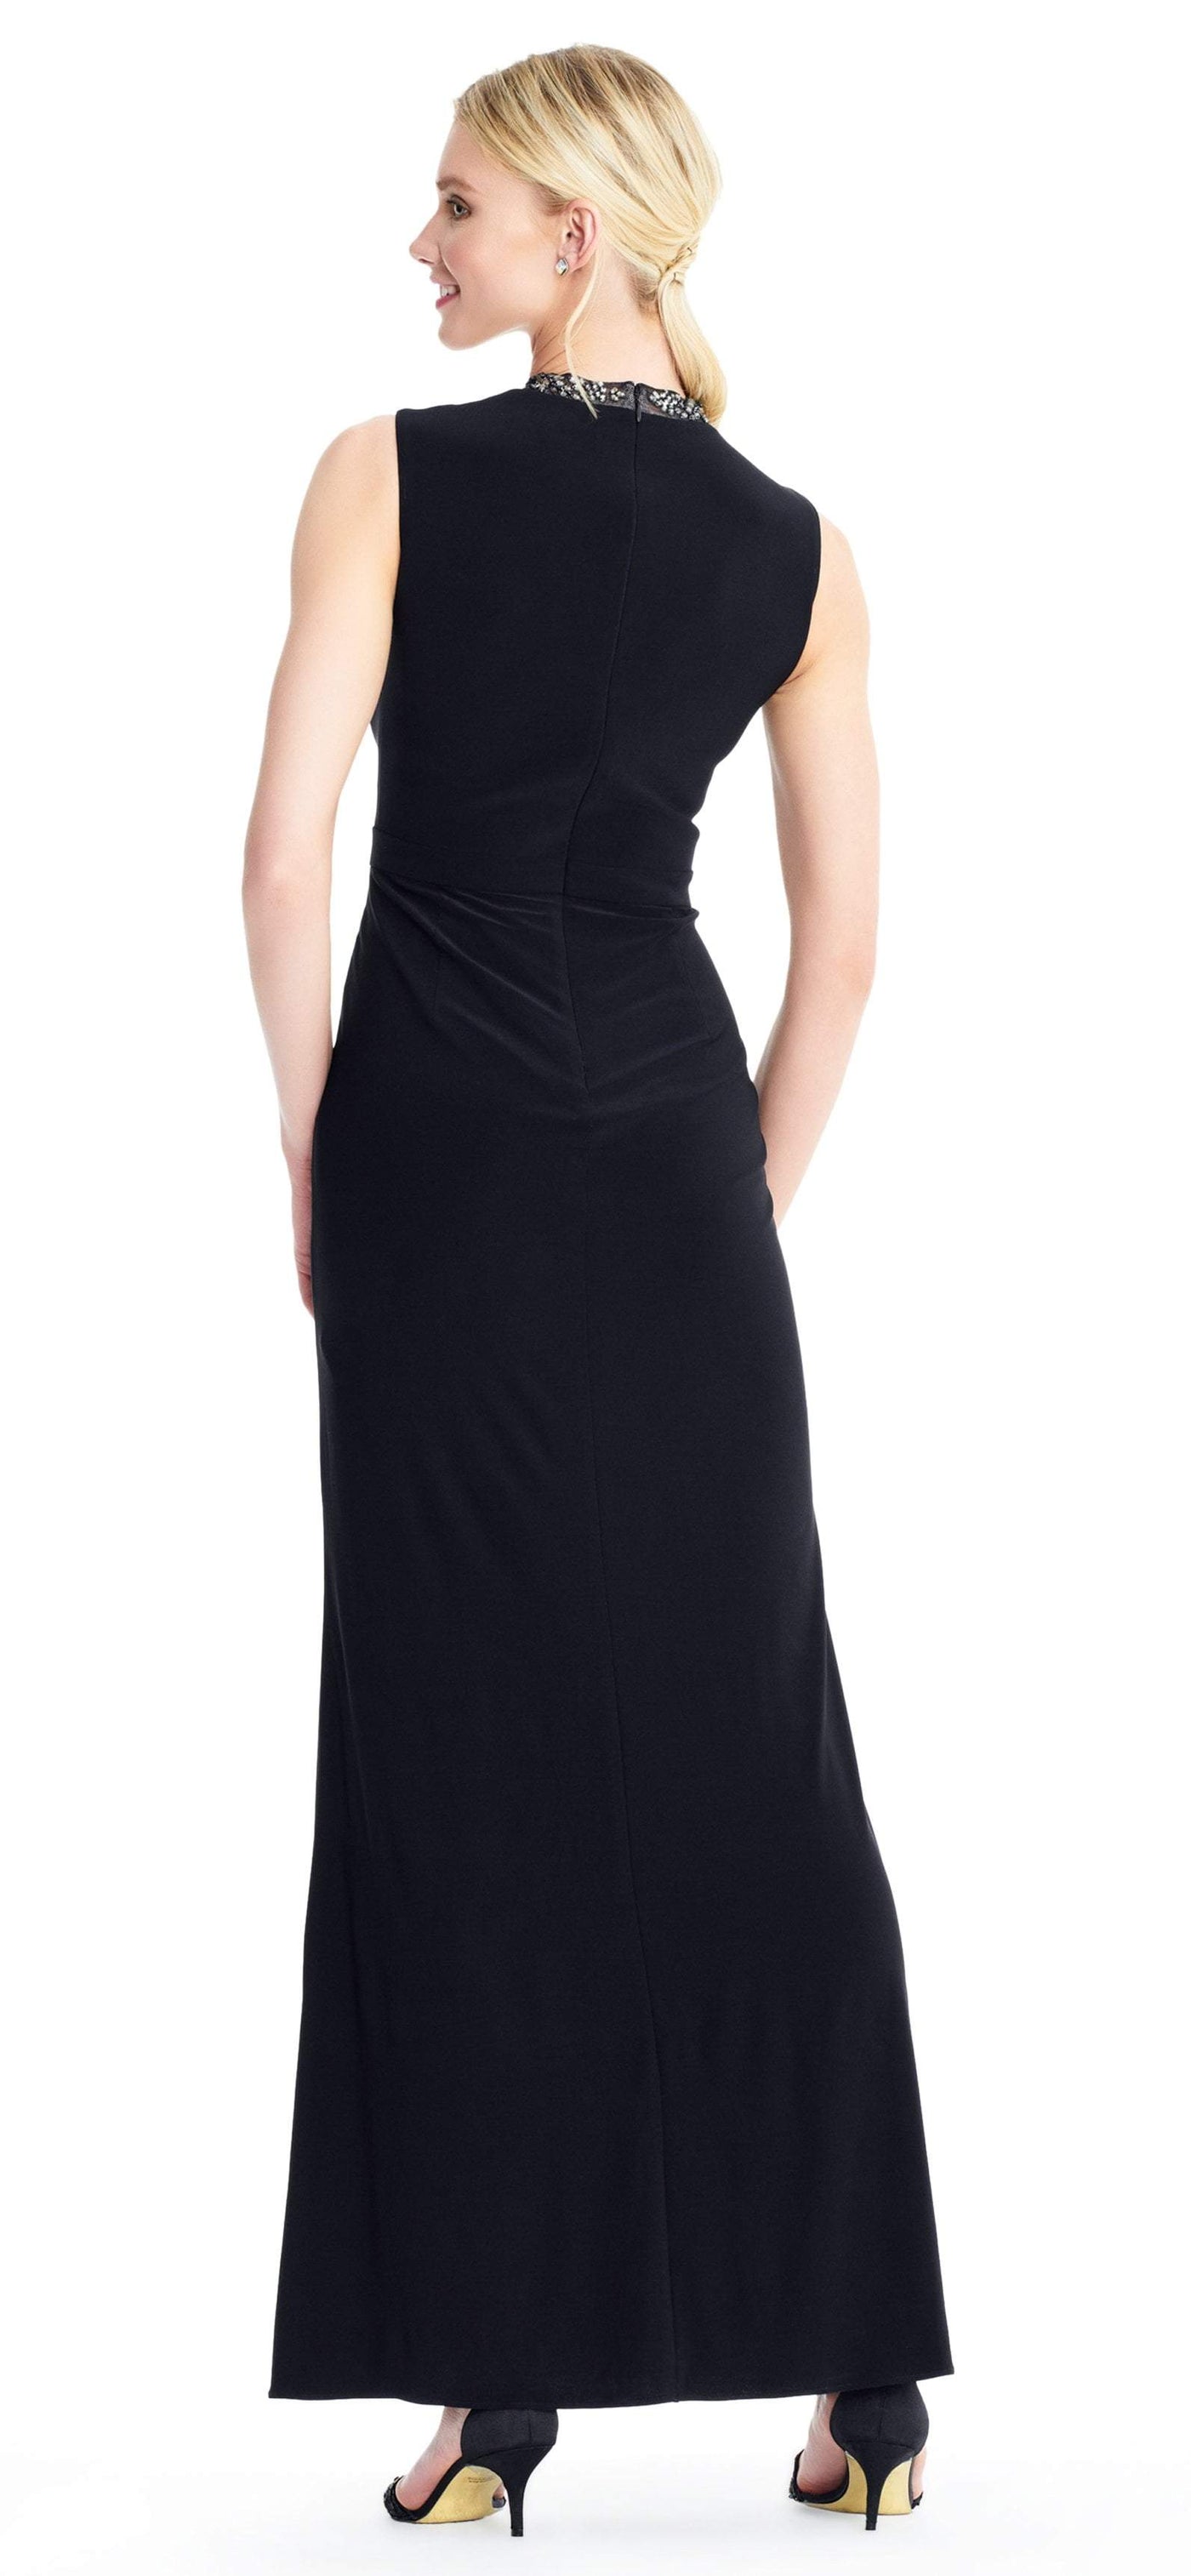 Adrianna Papell - AP1E204134 Bead Embellished High Neck Dress In Black